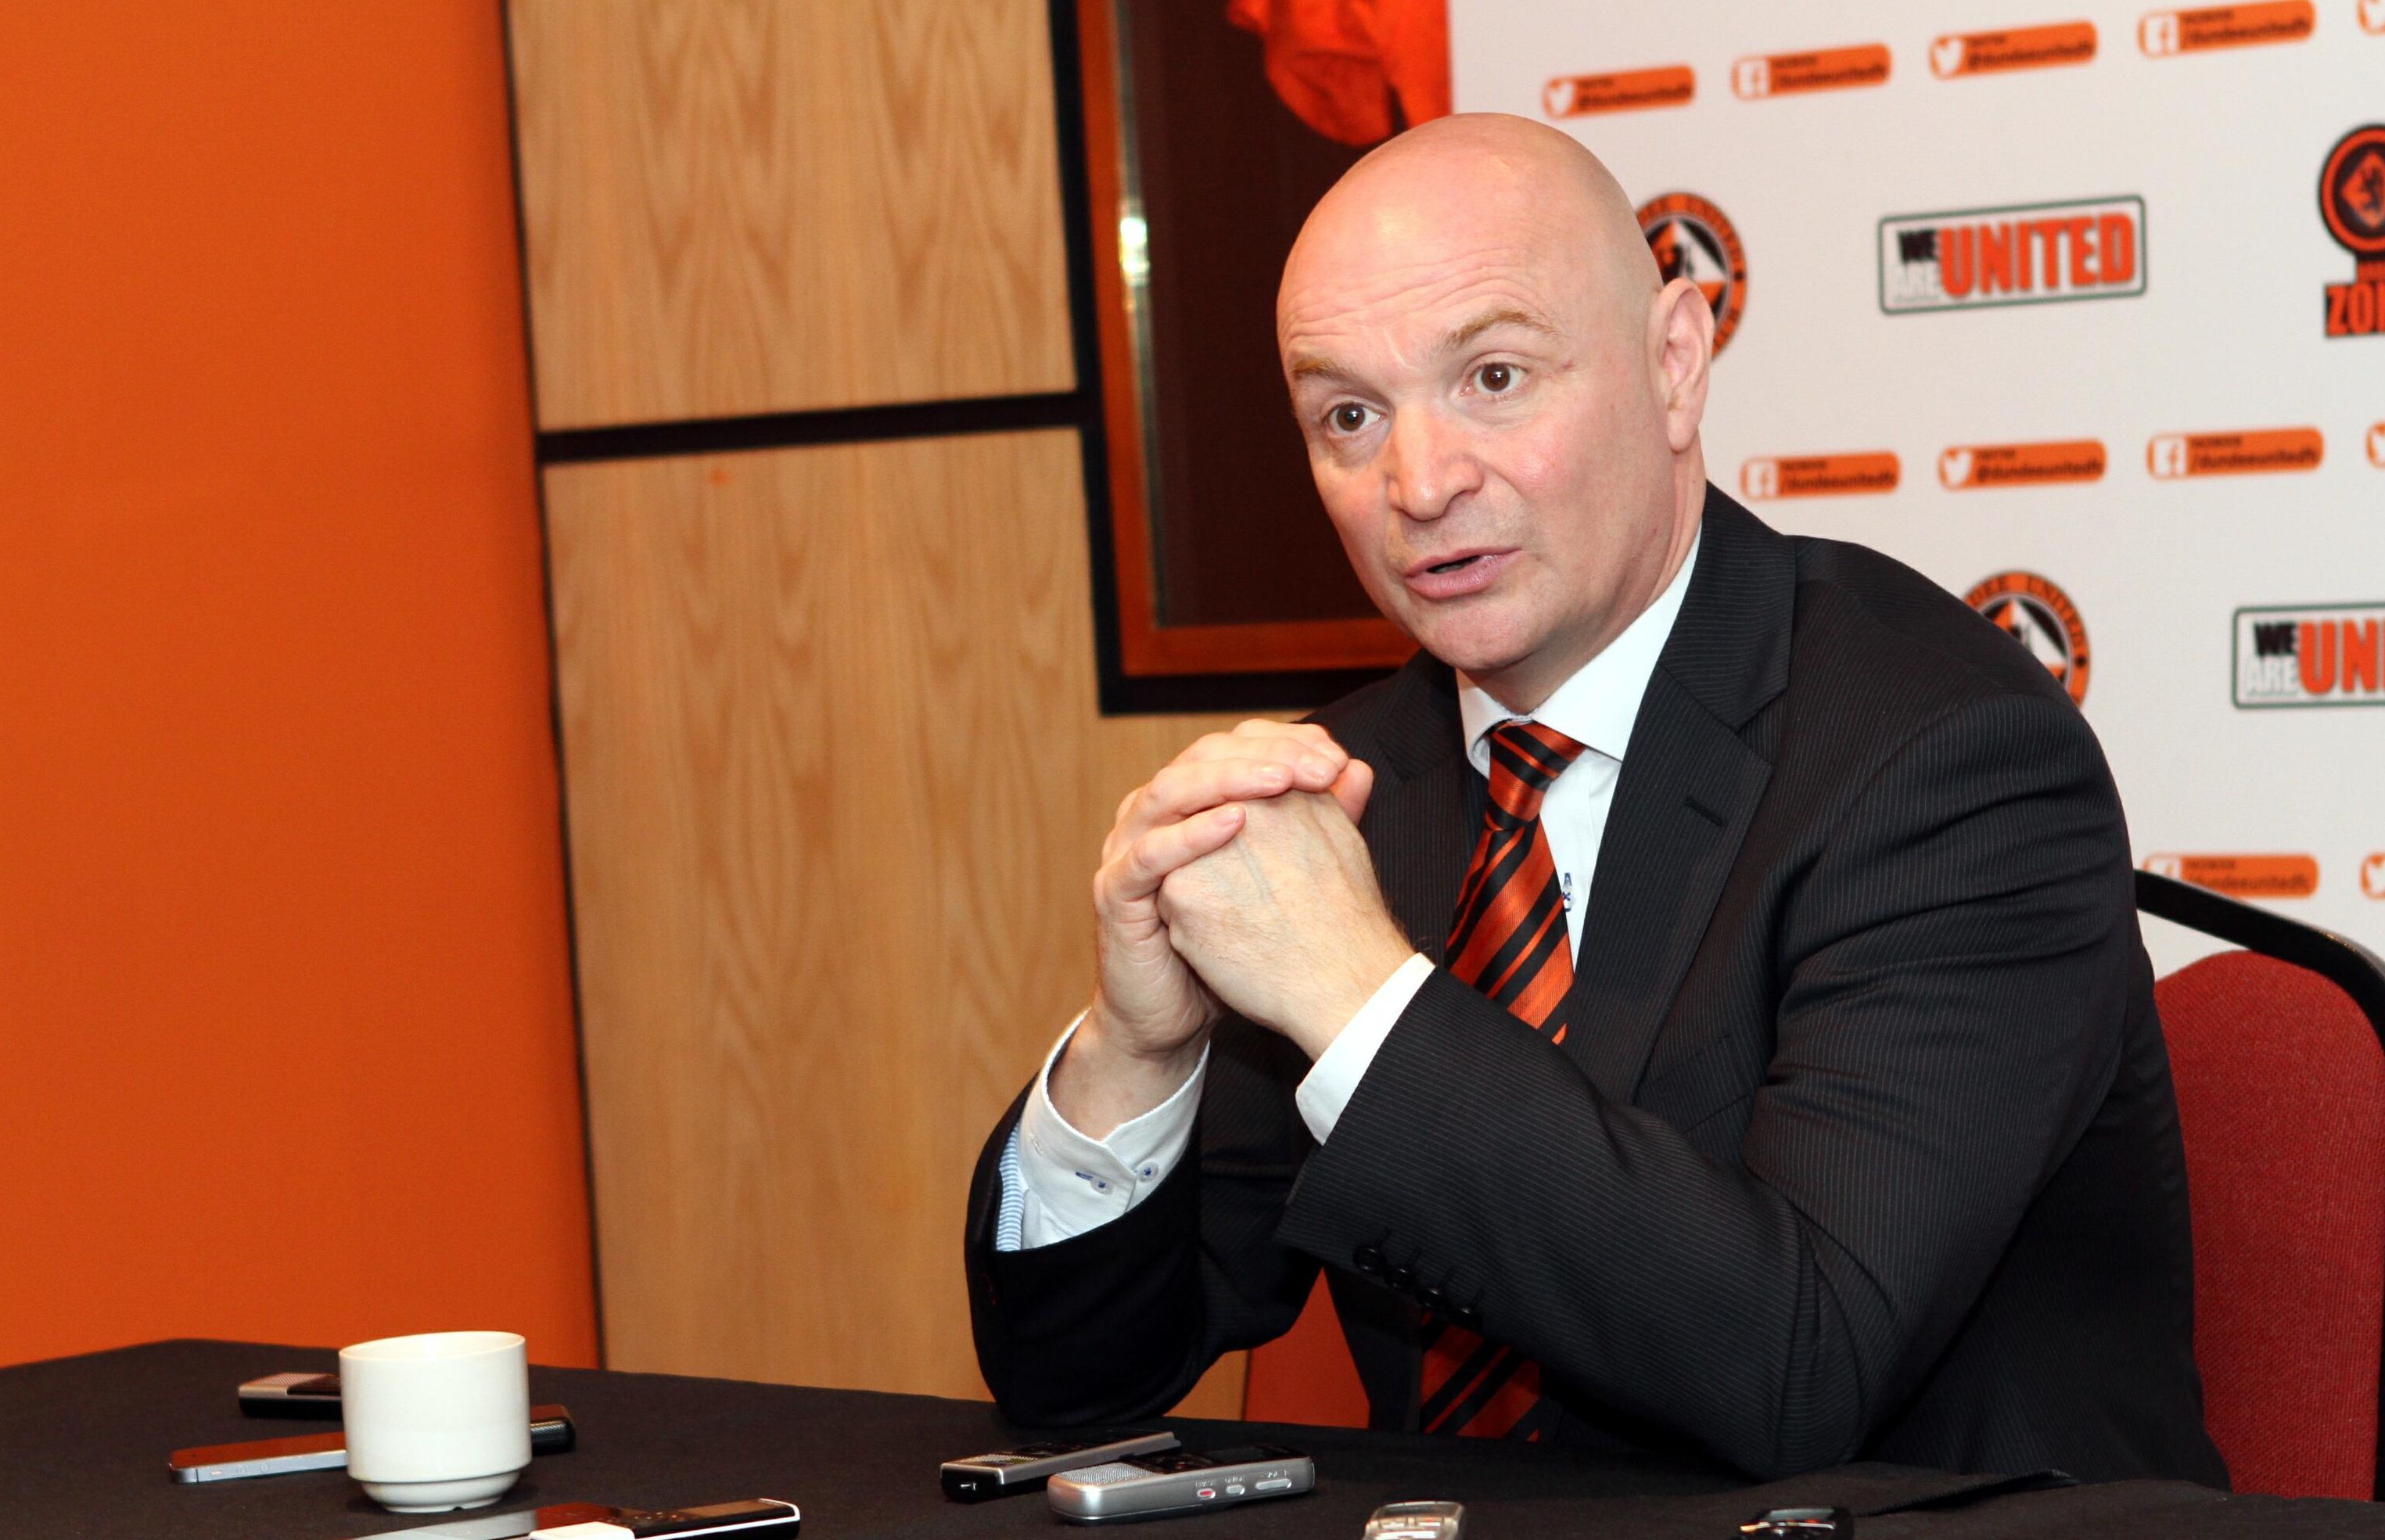 The Federation is angry at Dundee  United chairman Stephen Thompson's refusal to host an open question and answer sessions.